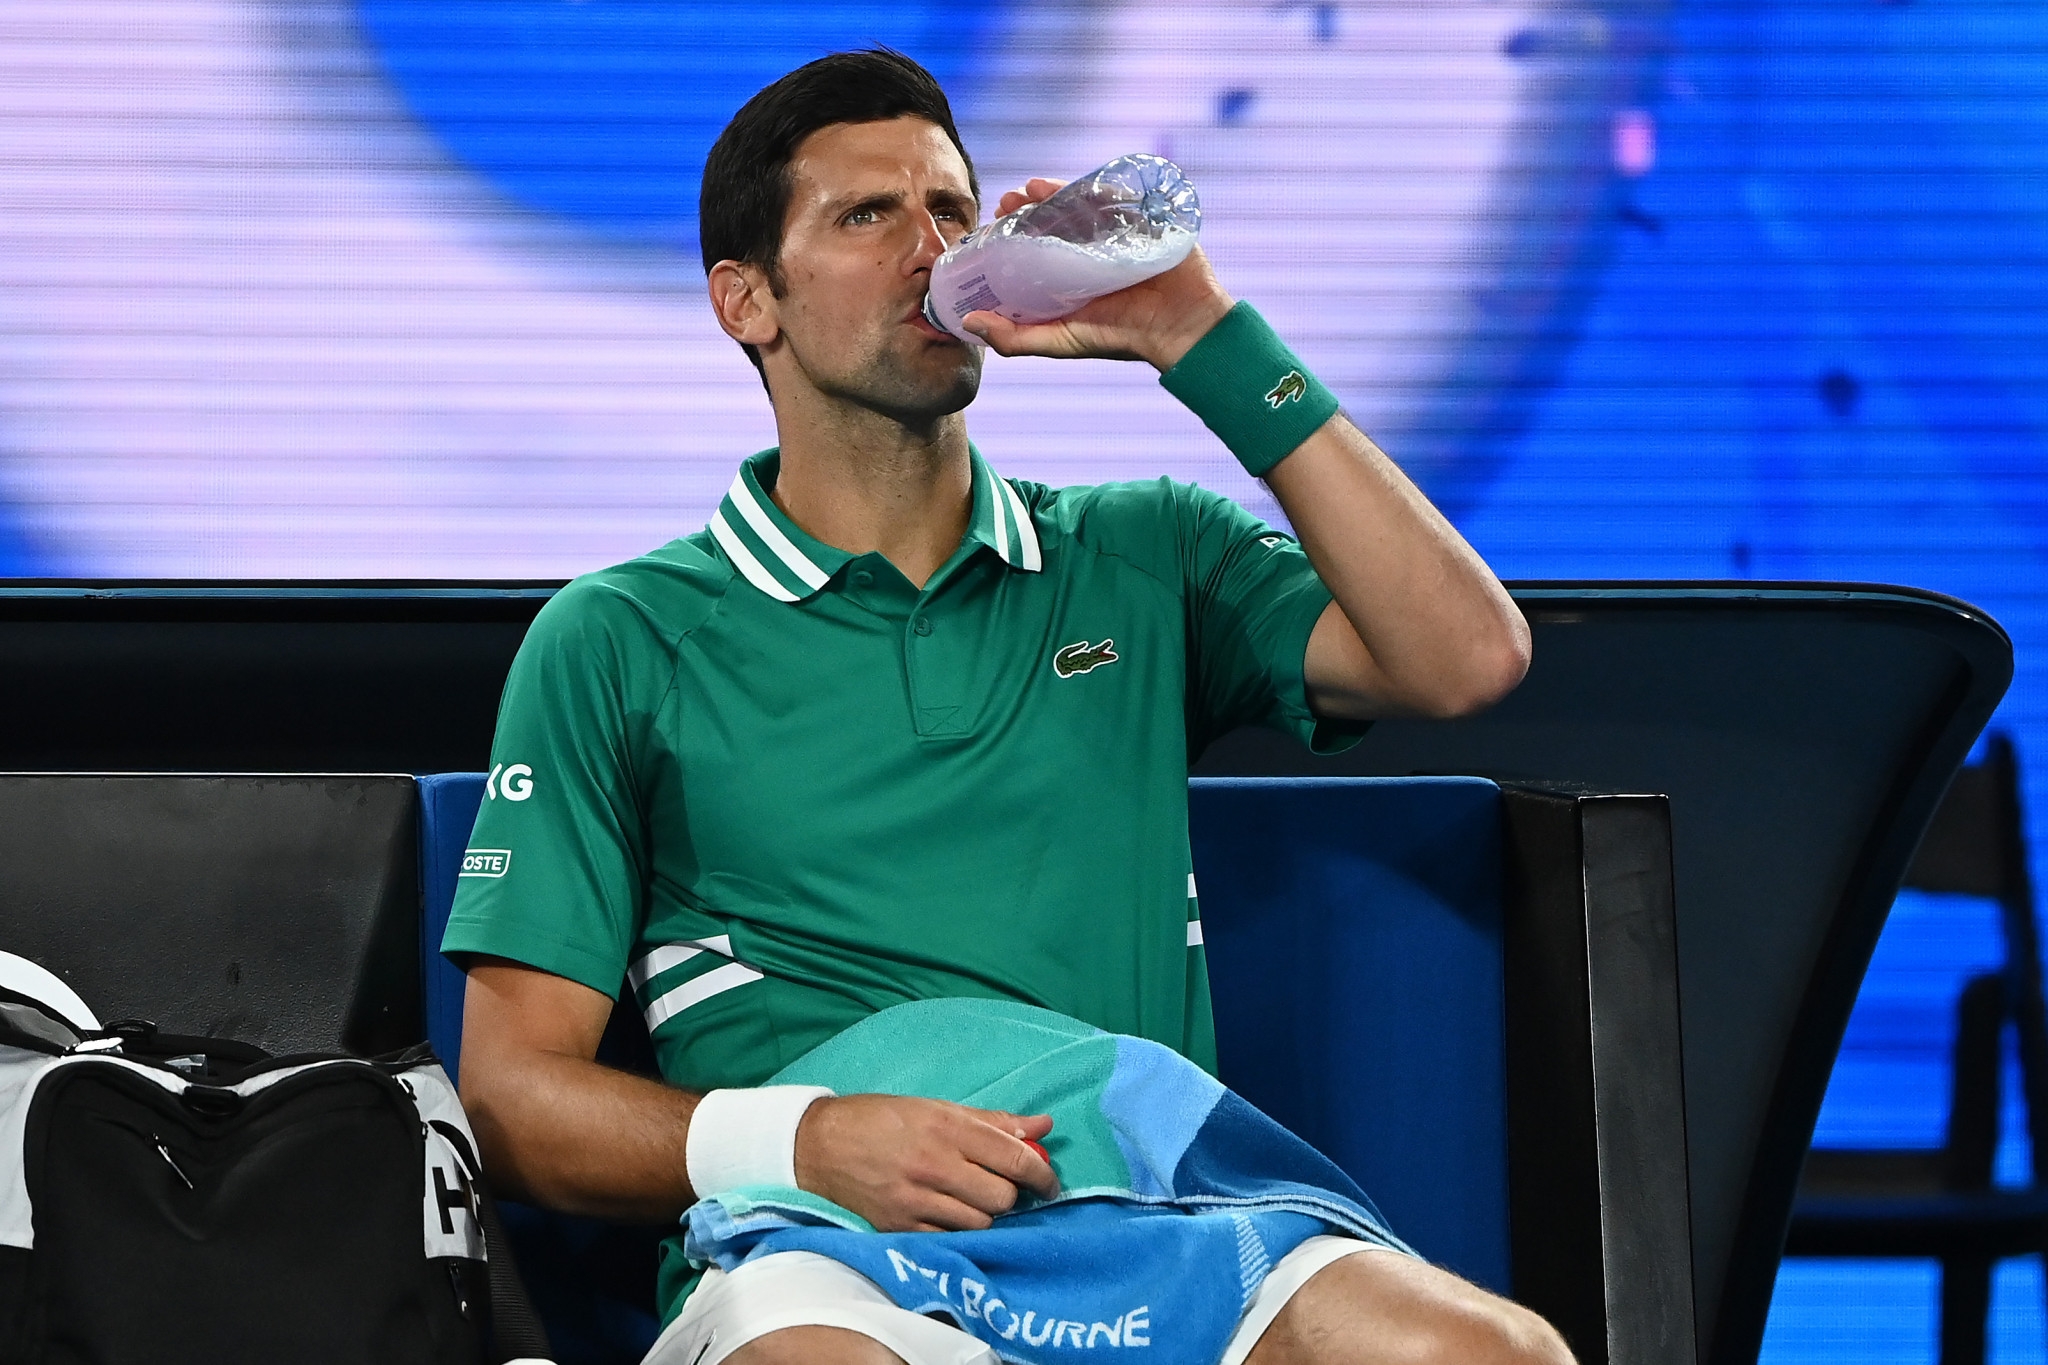 Defending men's champion Novak Djokovic takes a drink during a change of ends on the way to a first round win over Jeremy Chardy ©Getty Images